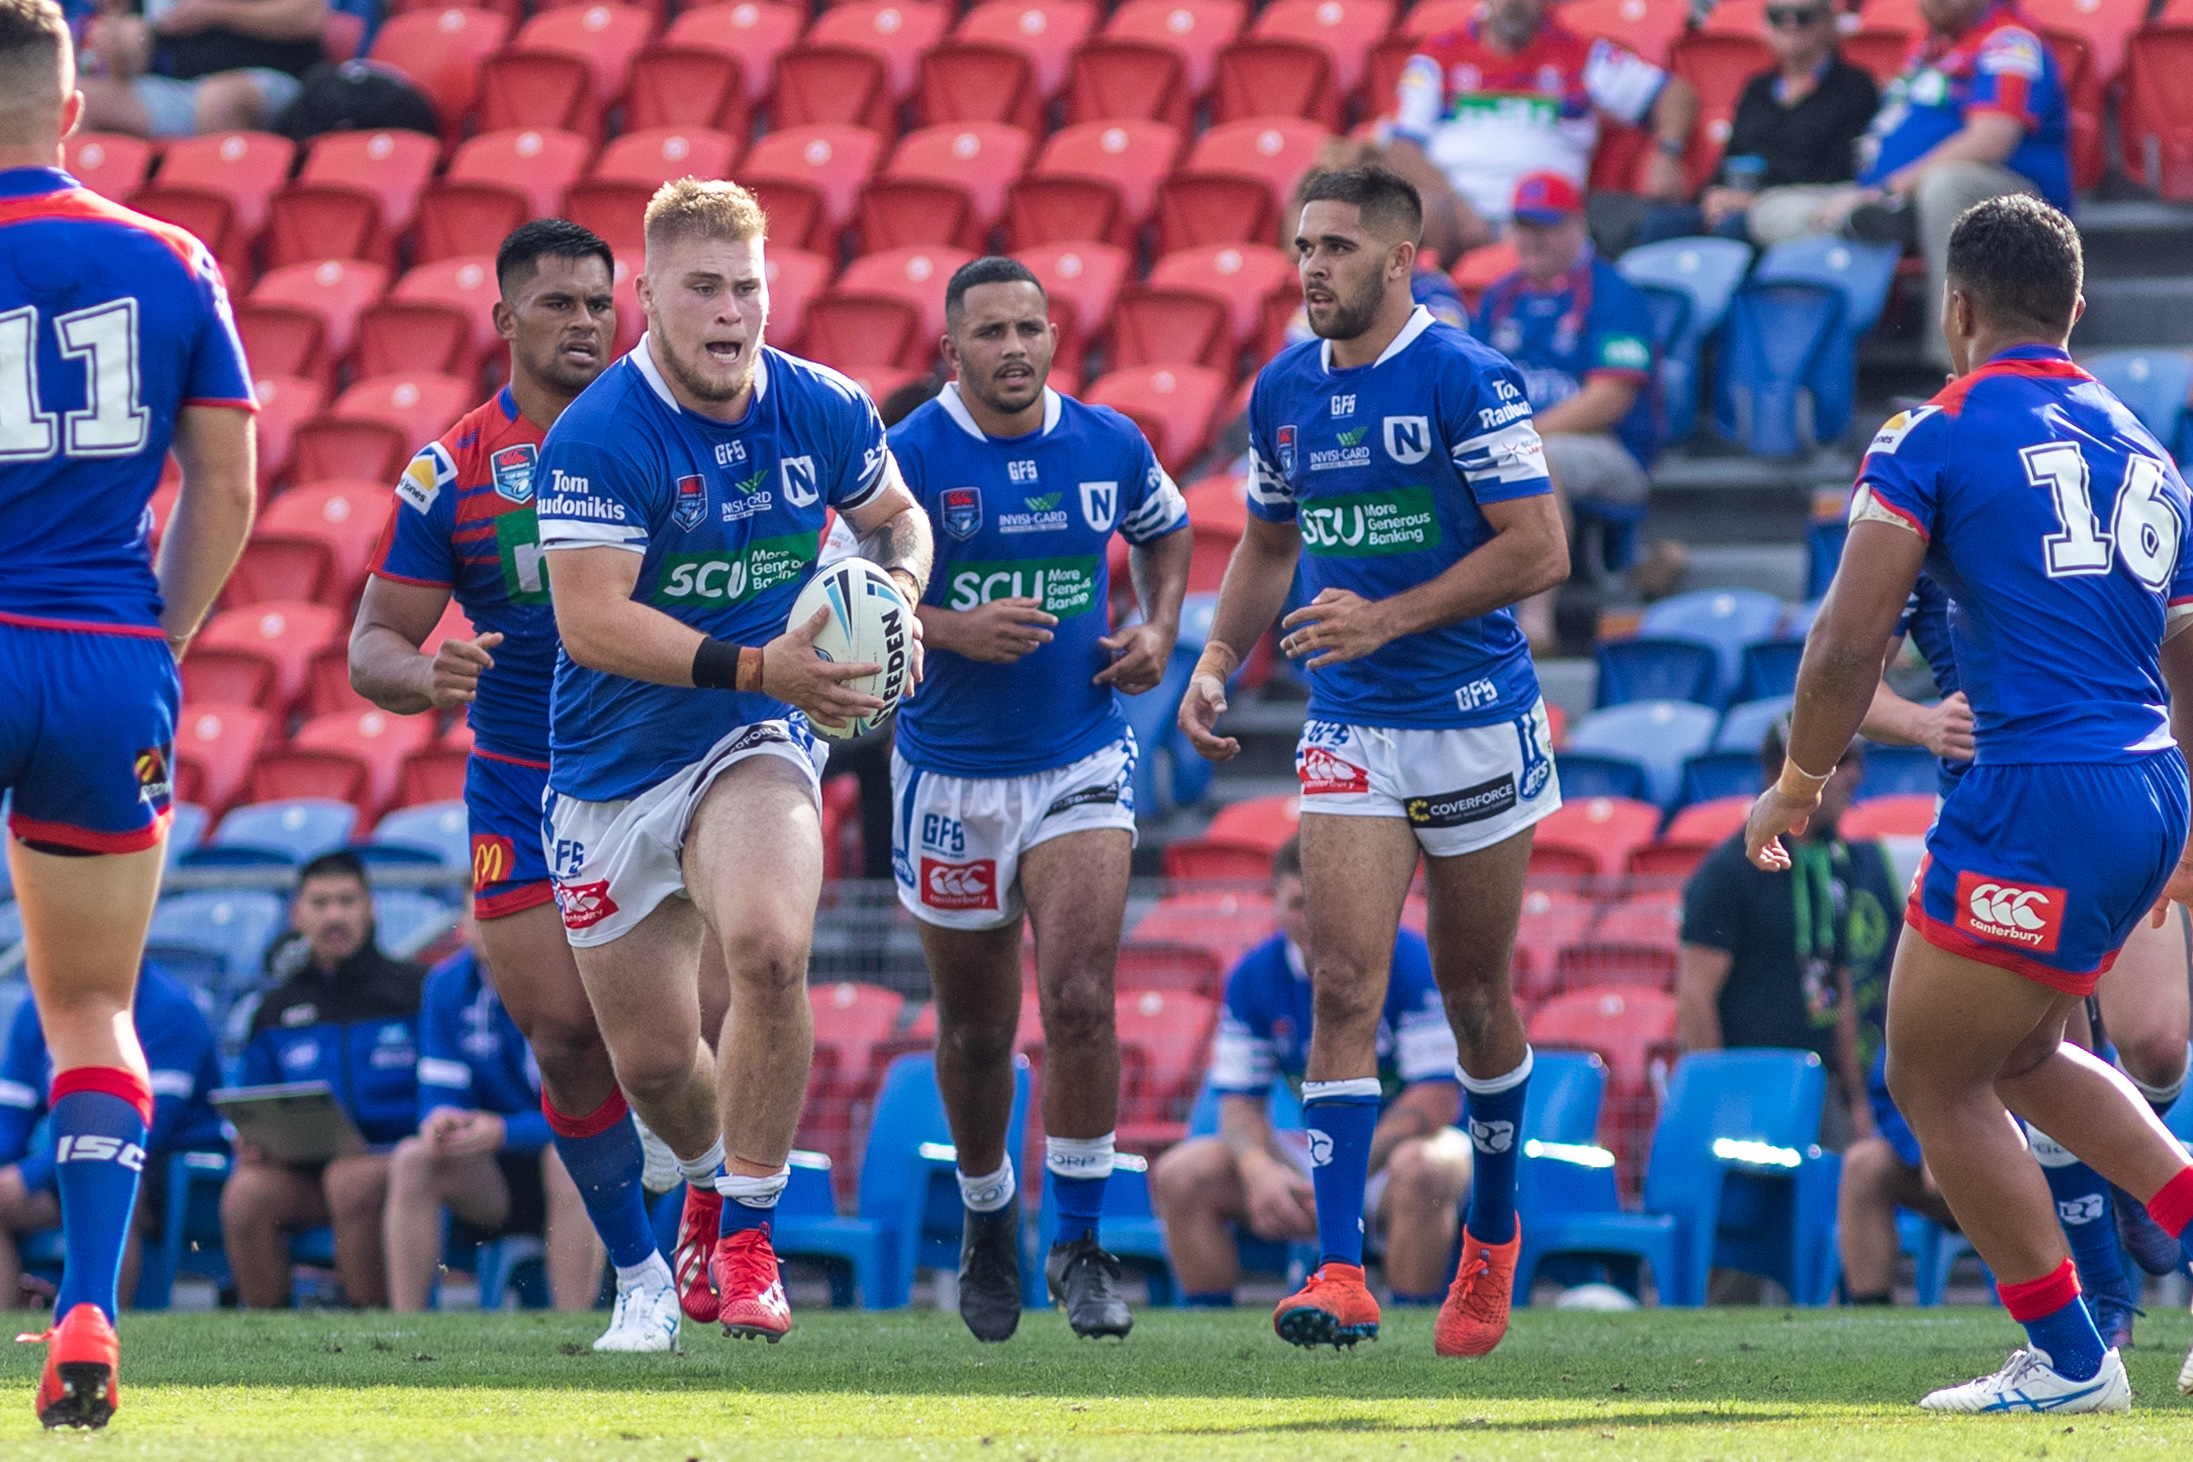 March 15, 2019 - Newcastle, New South Wales, Australia, Daniel Vasquez of the Jets during round 1 of the NSWRL Canterbury Cup NSW Macdonald Jones Stadium in Newcastle, New South Wales. (Mario Facchini/mafphotography)